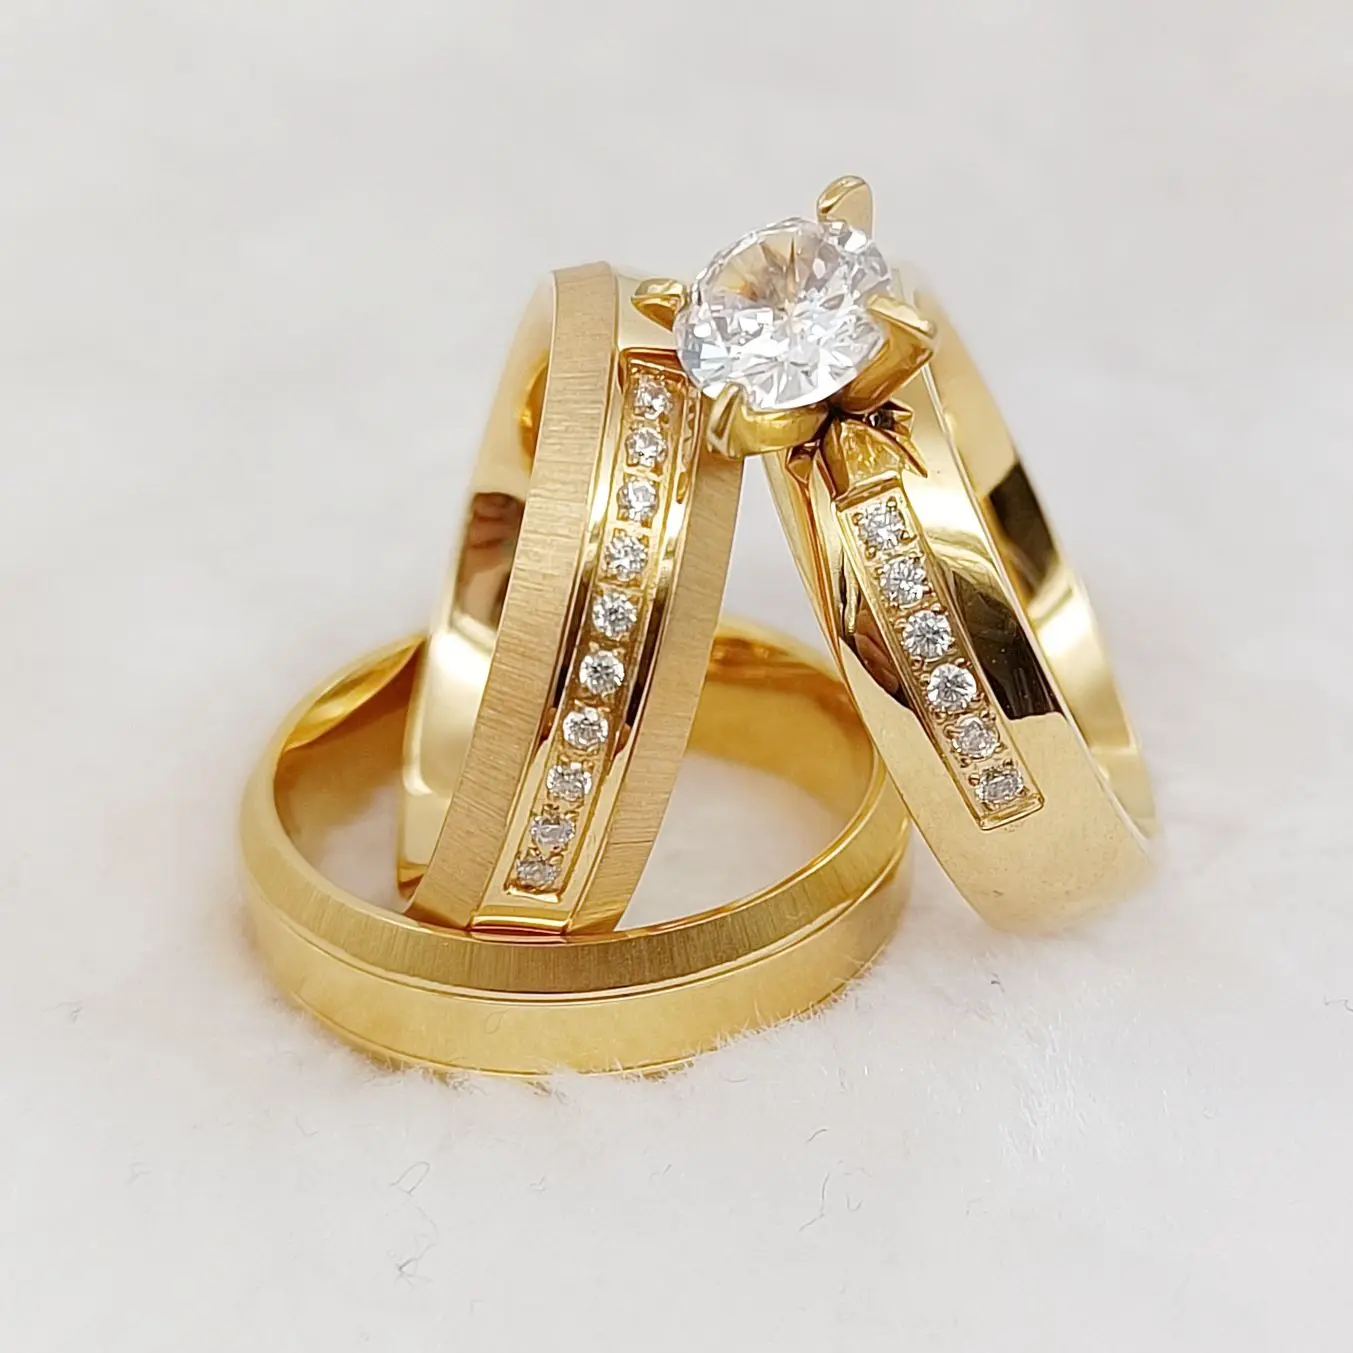 

High Quality 3pcs Statement Wedding Engagement Rings Set Ladies Gents cz Diamond 18K Gold Filled Jewelry Promise Ring for Couple